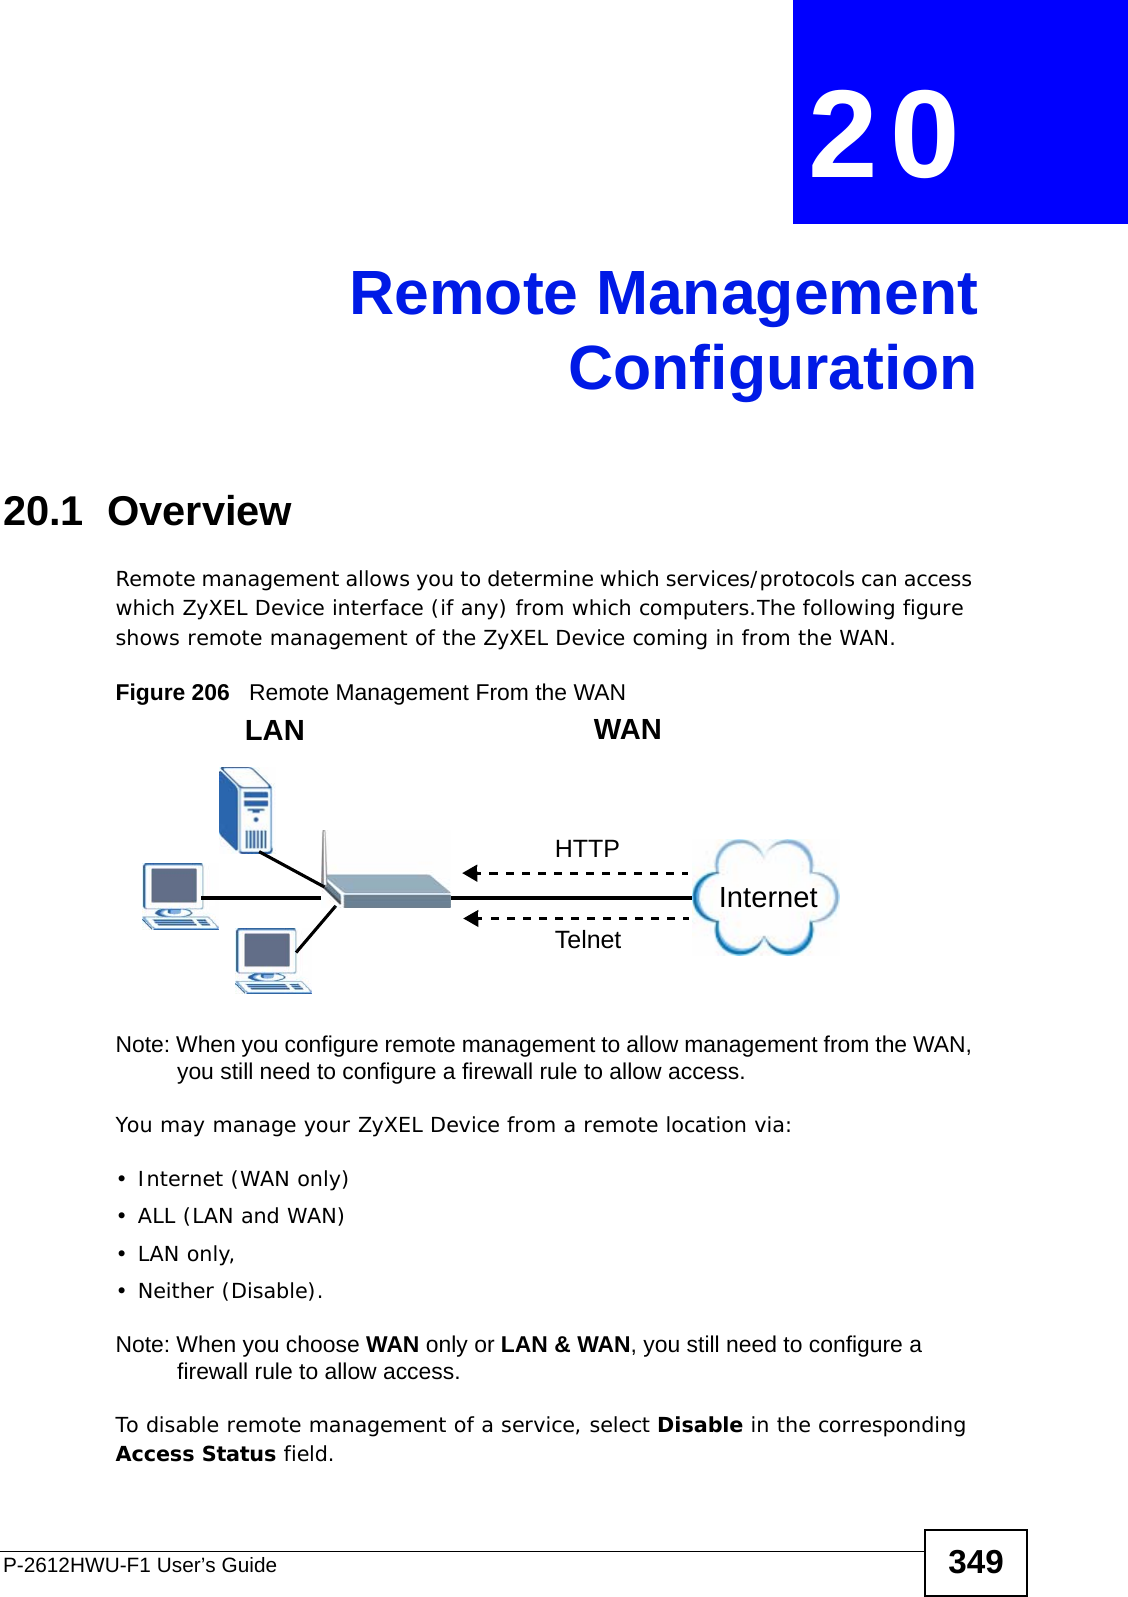 P-2612HWU-F1 User’s Guide 349CHAPTER  20 Remote ManagementConfiguration20.1  Overview Remote management allows you to determine which services/protocols can access which ZyXEL Device interface (if any) from which computers.The following figure shows remote management of the ZyXEL Device coming in from the WAN.Figure 206   Remote Management From the WANNote: When you configure remote management to allow management from the WAN, you still need to configure a firewall rule to allow access.You may manage your ZyXEL Device from a remote location via:•Internet (WAN only)•ALL (LAN and WAN)•LAN only, • Neither (Disable).Note: When you choose WAN only or LAN &amp; WAN, you still need to configure a firewall rule to allow access.To disable remote management of a service, select Disable in the corresponding Access Status field.LAN WANHTTPTelnetInternet